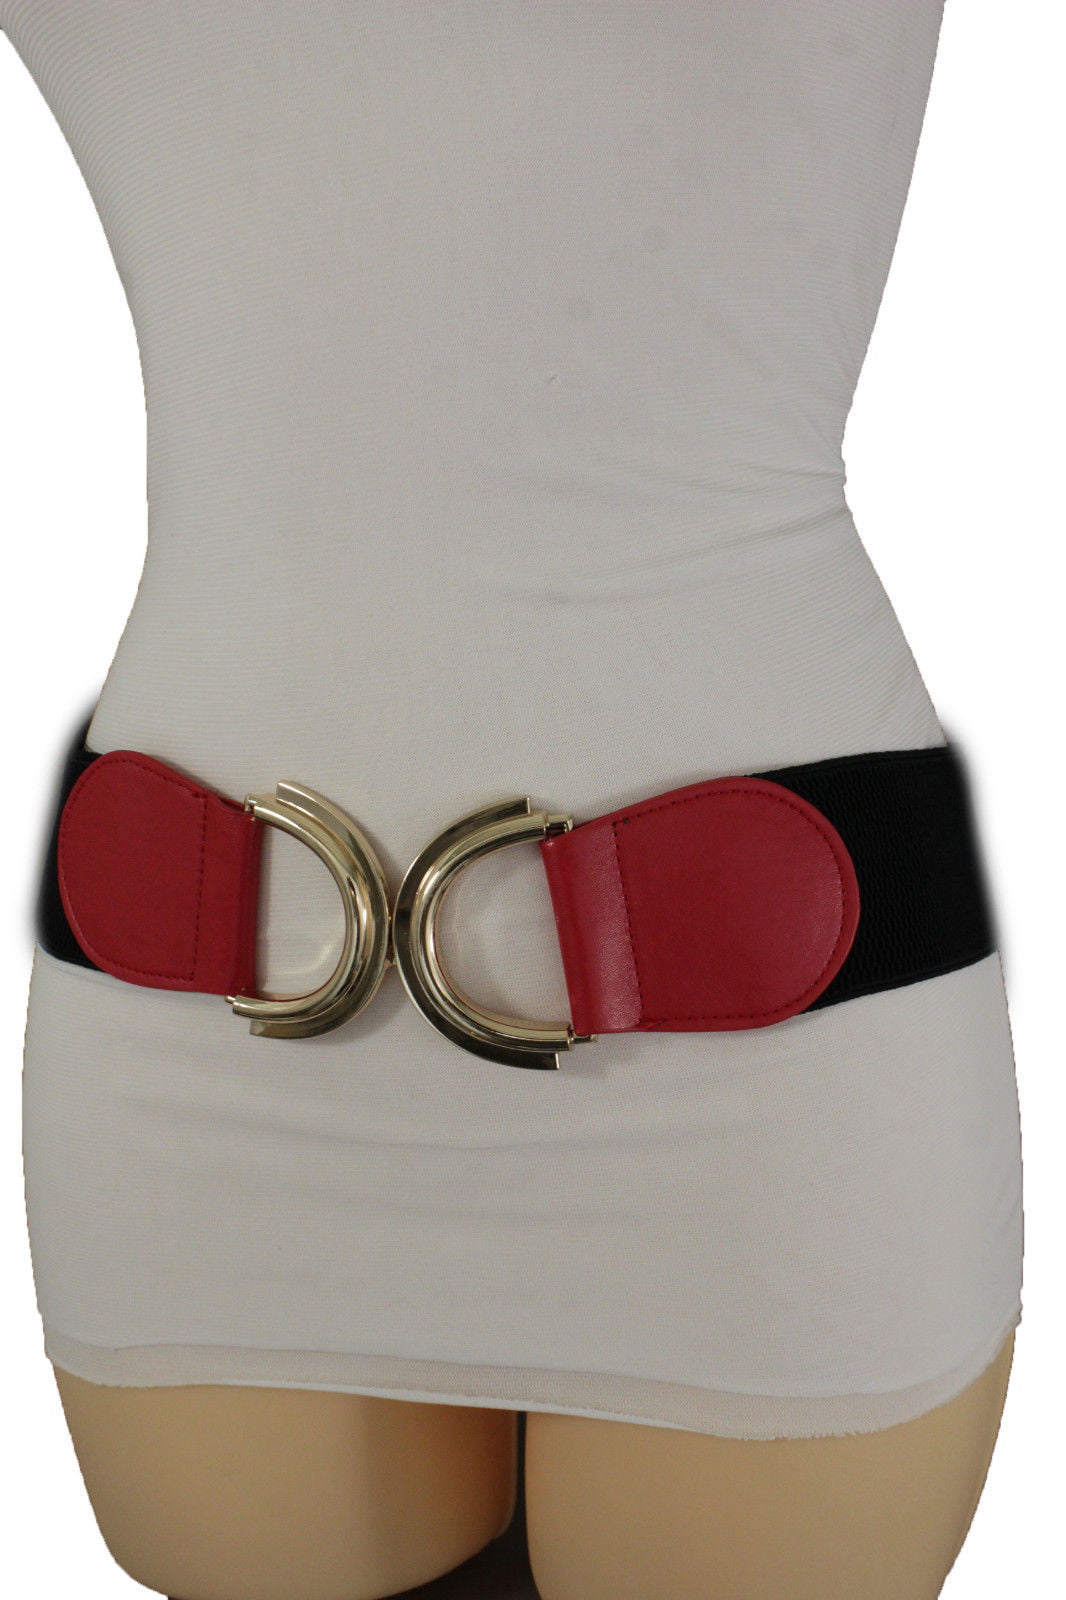 New Women Fashion Belt Red Faux Suede Leather Big Buckle Stretch Waistband S M 